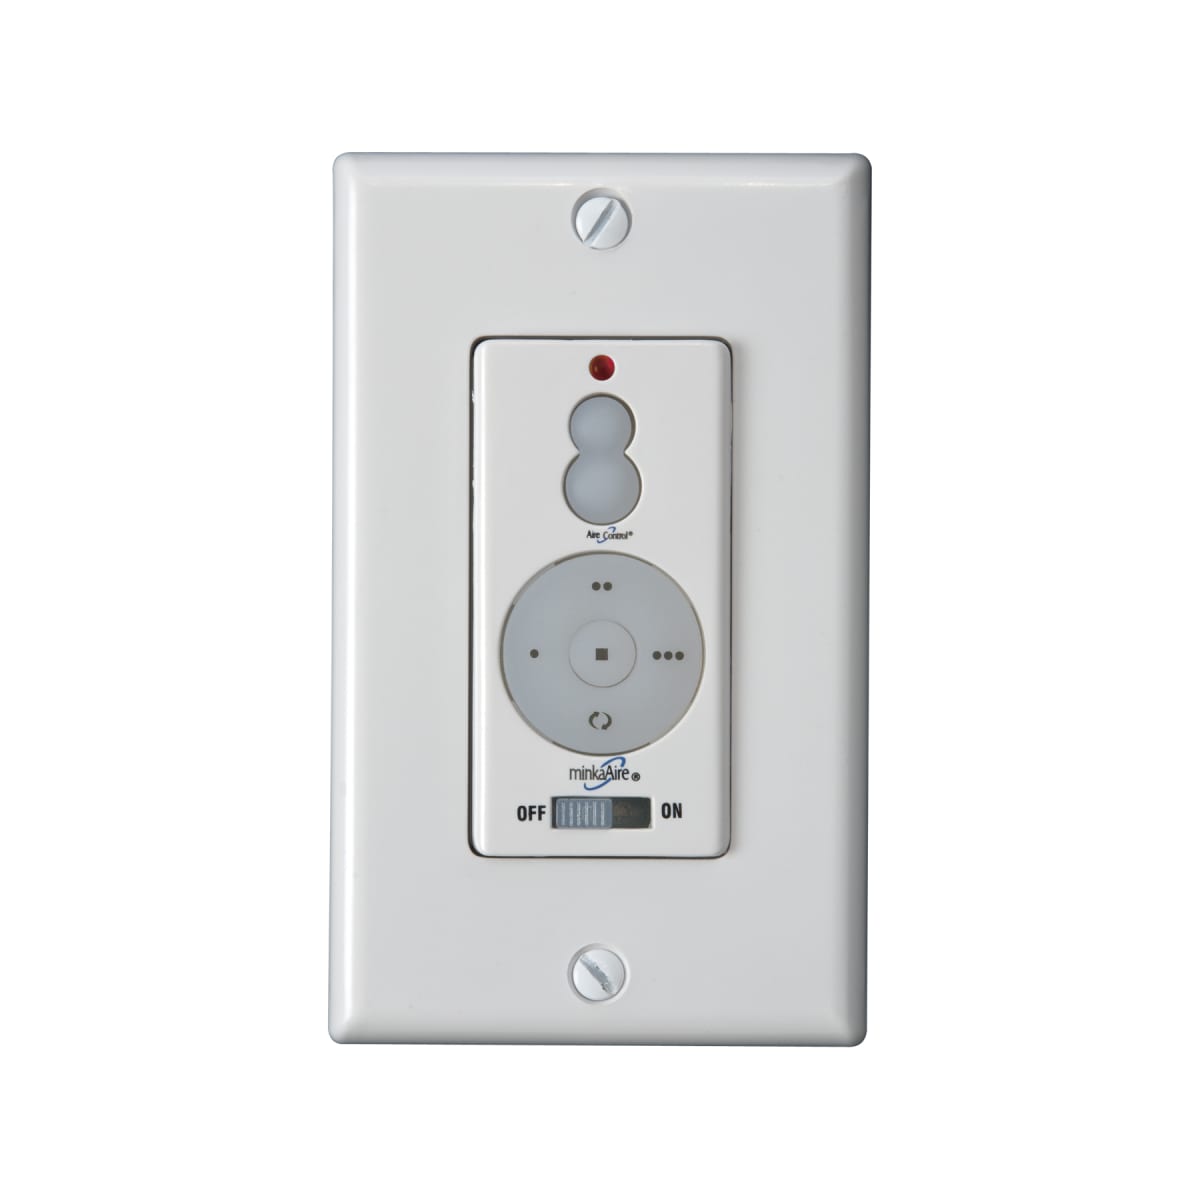 Minka-Aire Wall Control System in White